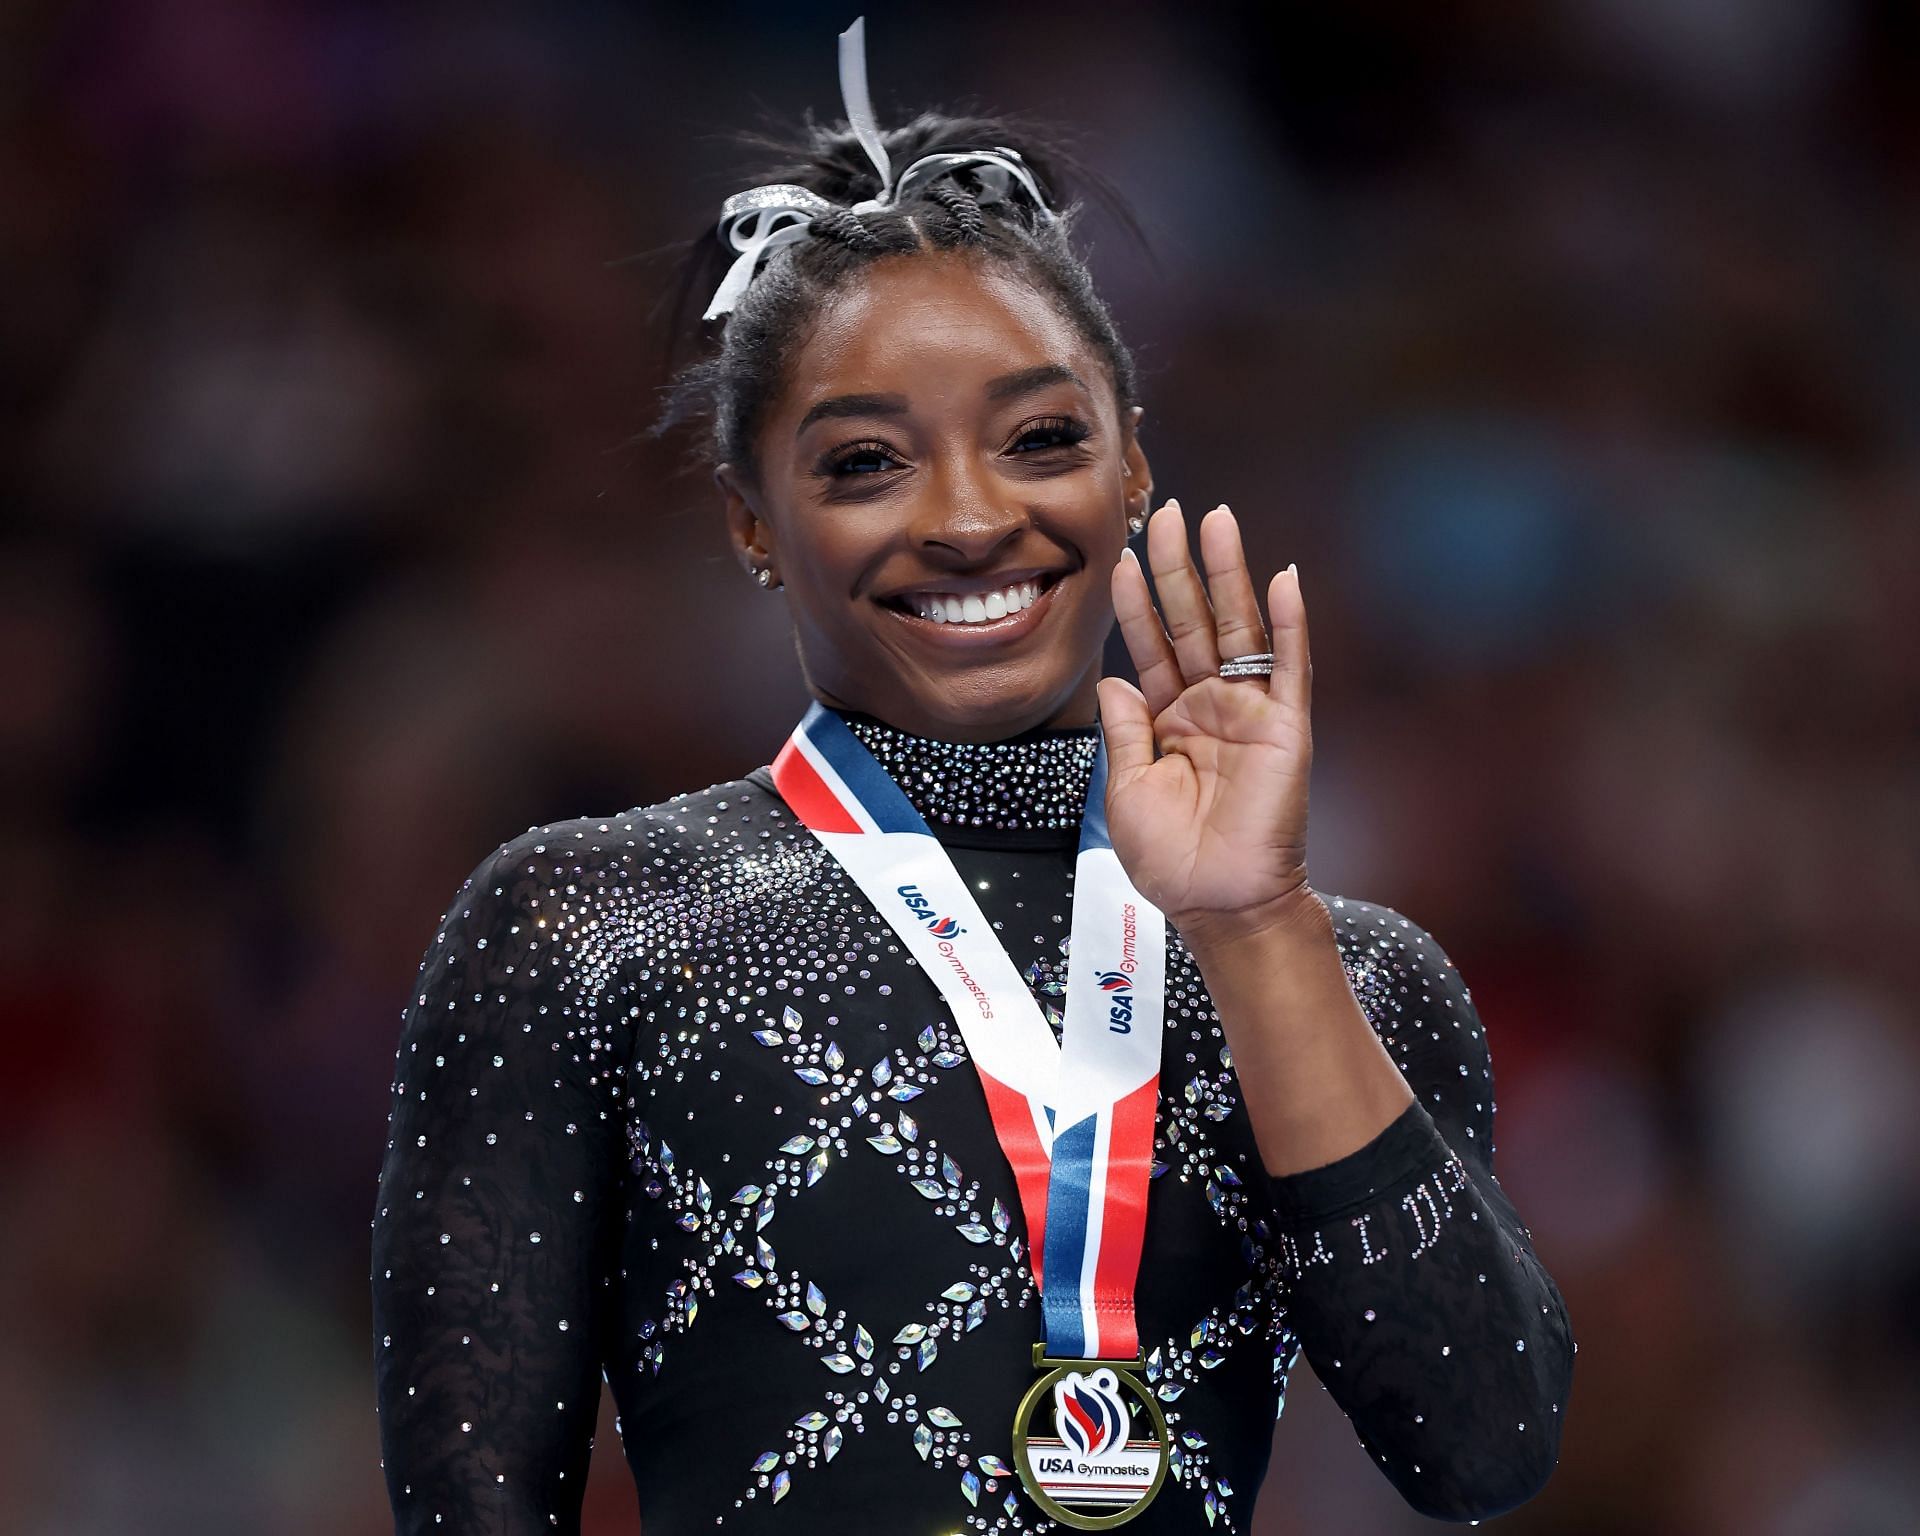 Simone Biles after competing in the floor exercise at the 2023 U.S. Gymnastics Championships in San Jose, California